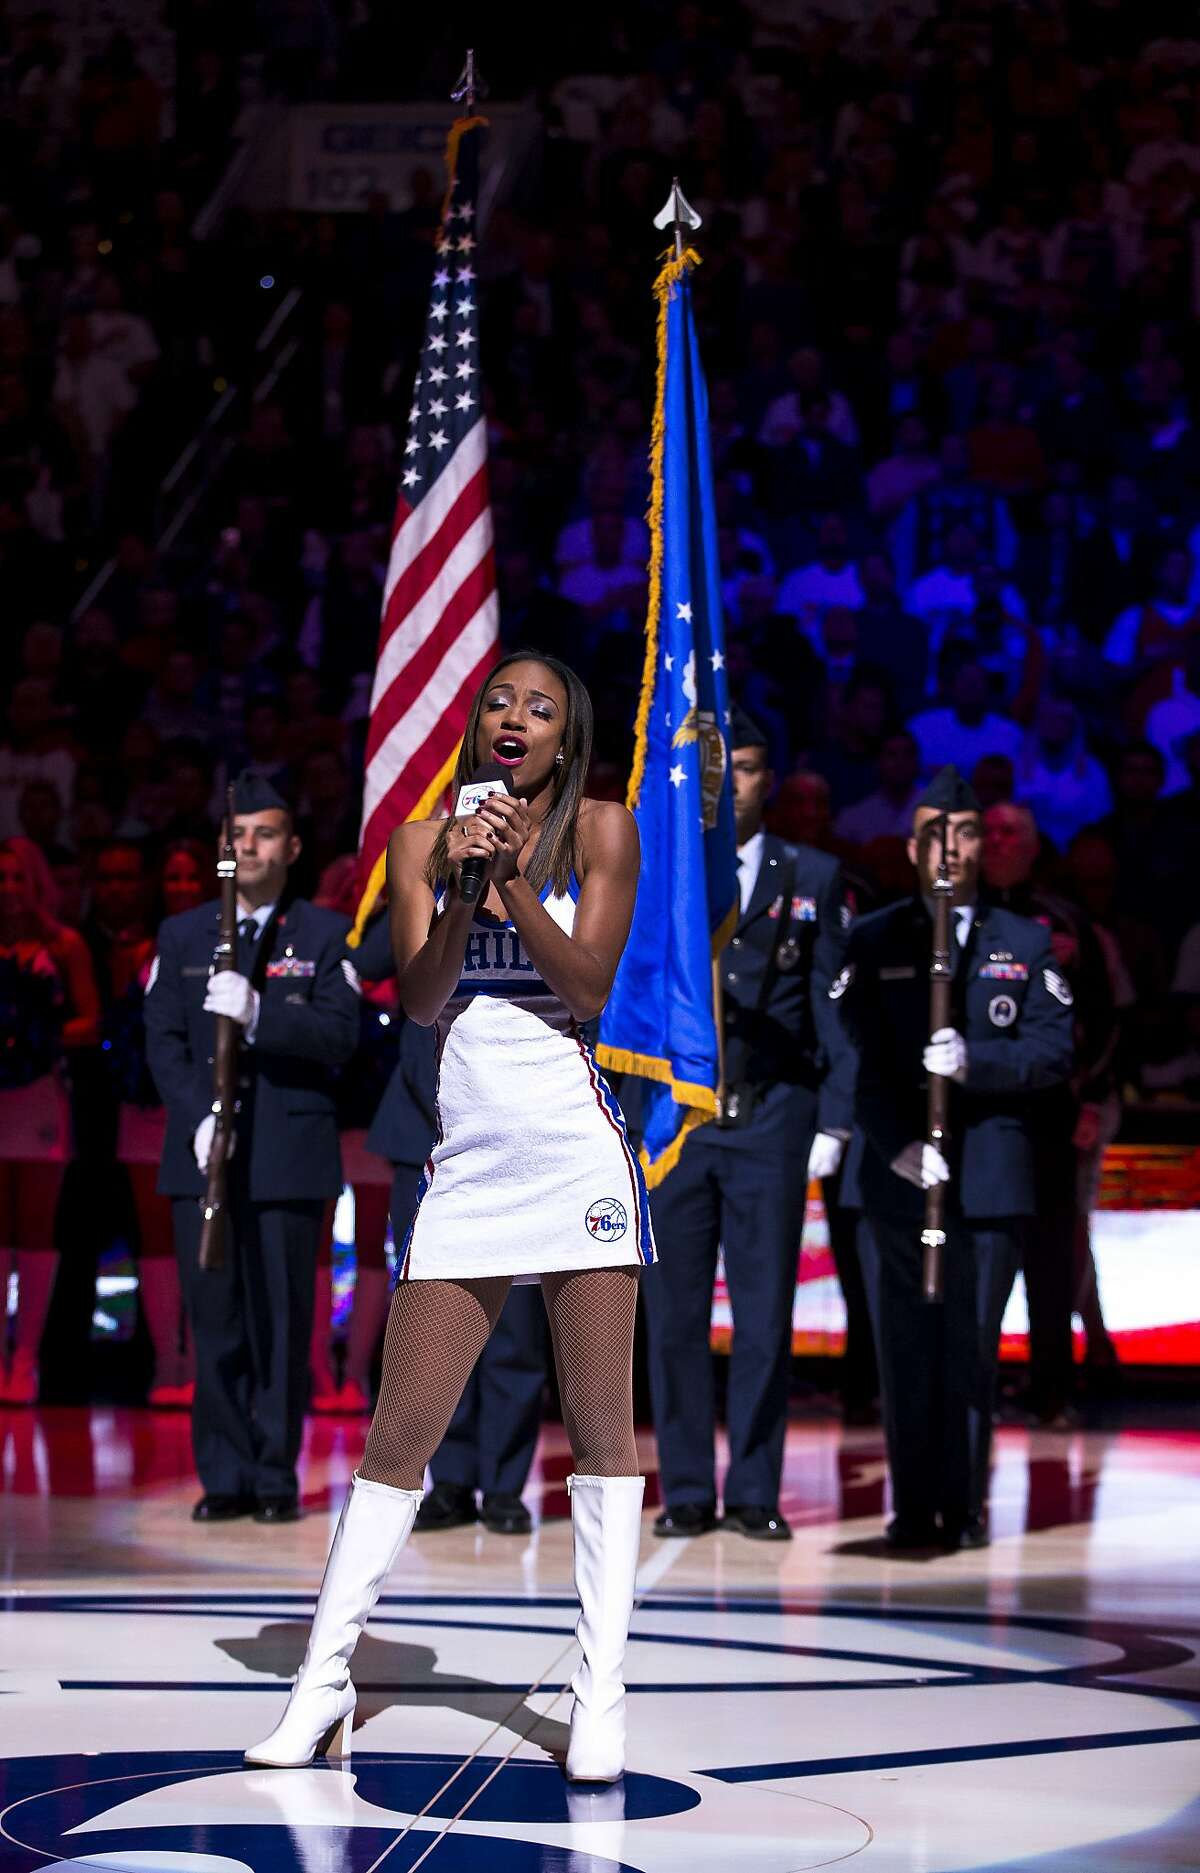 Philadelphia 76ers' Dancer Jemila performs the national anthem prior to an NBA basketball game against the Oklahoma City Thunder, Wednesday, Oct. 26, 2016, in Philadelphia. Philadelphia 76ers national anthem singer Sevyn Streeter said she was told by the team she could not perform because of her "We Matter" jersey. The Sixers had Jemila sing the anthem. (AP Photo/Chris Szagola)